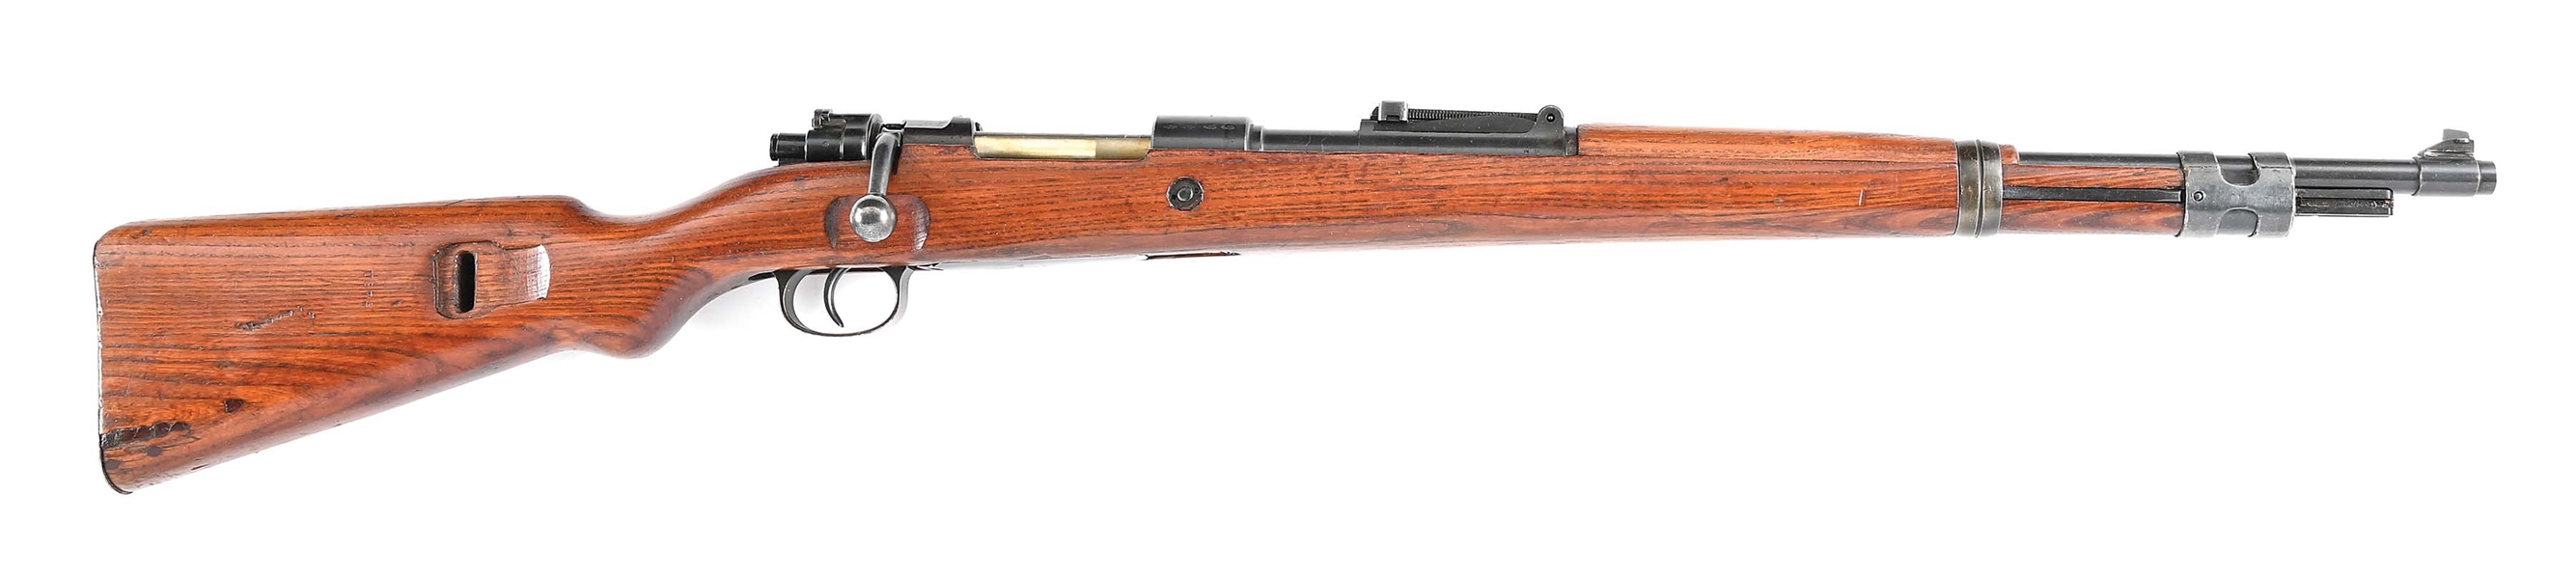 (C) EXTREMELY UNUSUAL GERMAN WWII STEYR "BNZ/41" CODE K98K BOLT ACTION RIFLE.